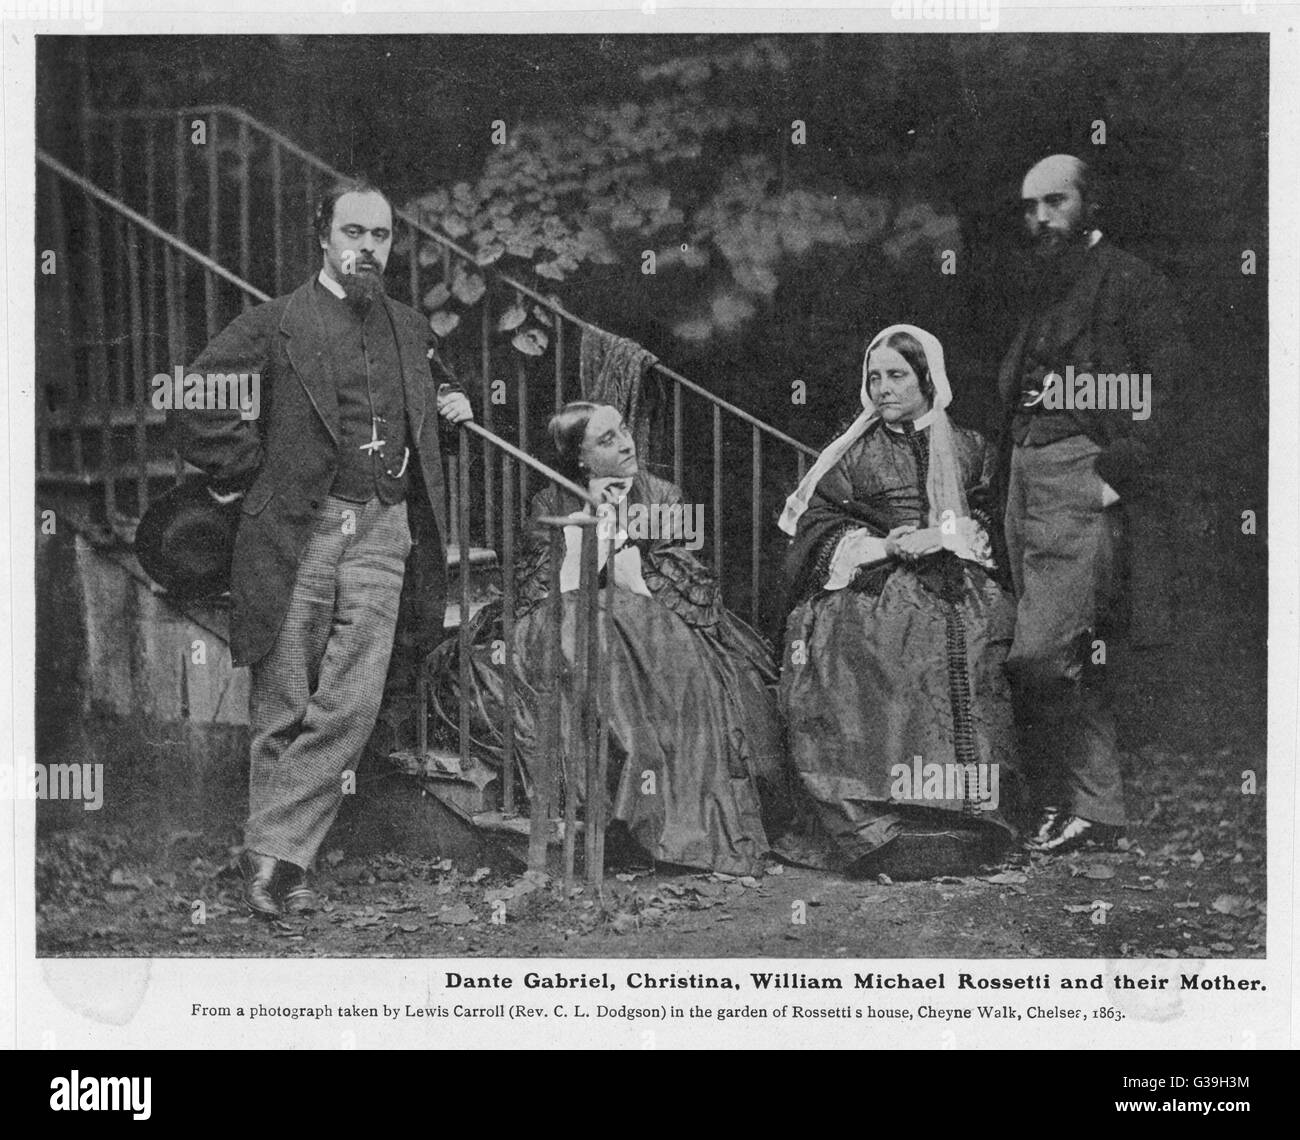 Poet and artist, Dante Gabriel Rossetti (1828-1882), with his sister Christina, his brother William Michael, and their mother in a photograph by Lewis Carroll (Rev CL Dodgson), 1863     Date: 1863 Stock Photo